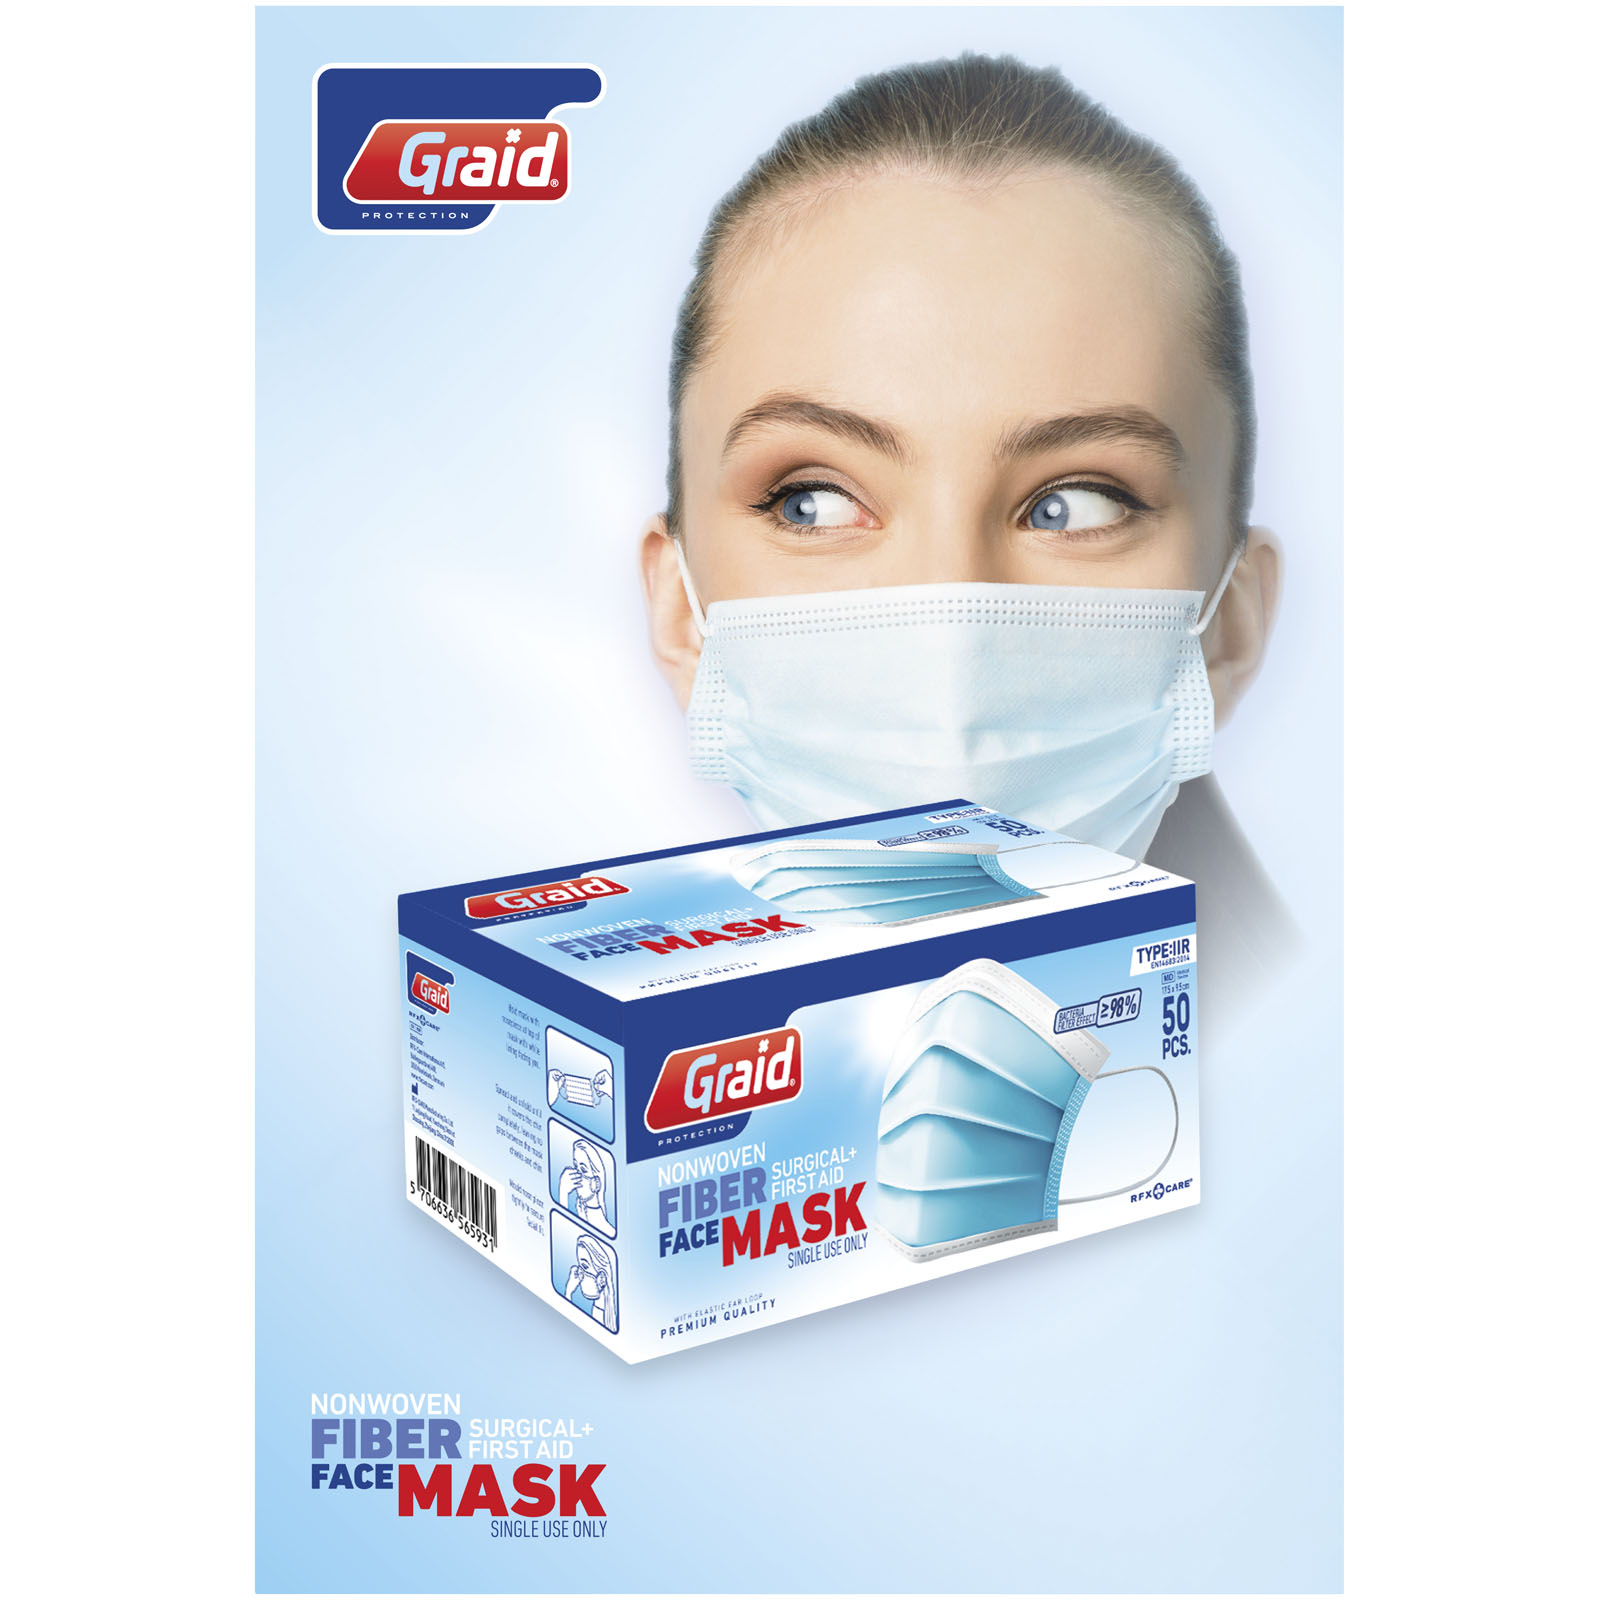 Advertising Protection - Moore type IIR face mask